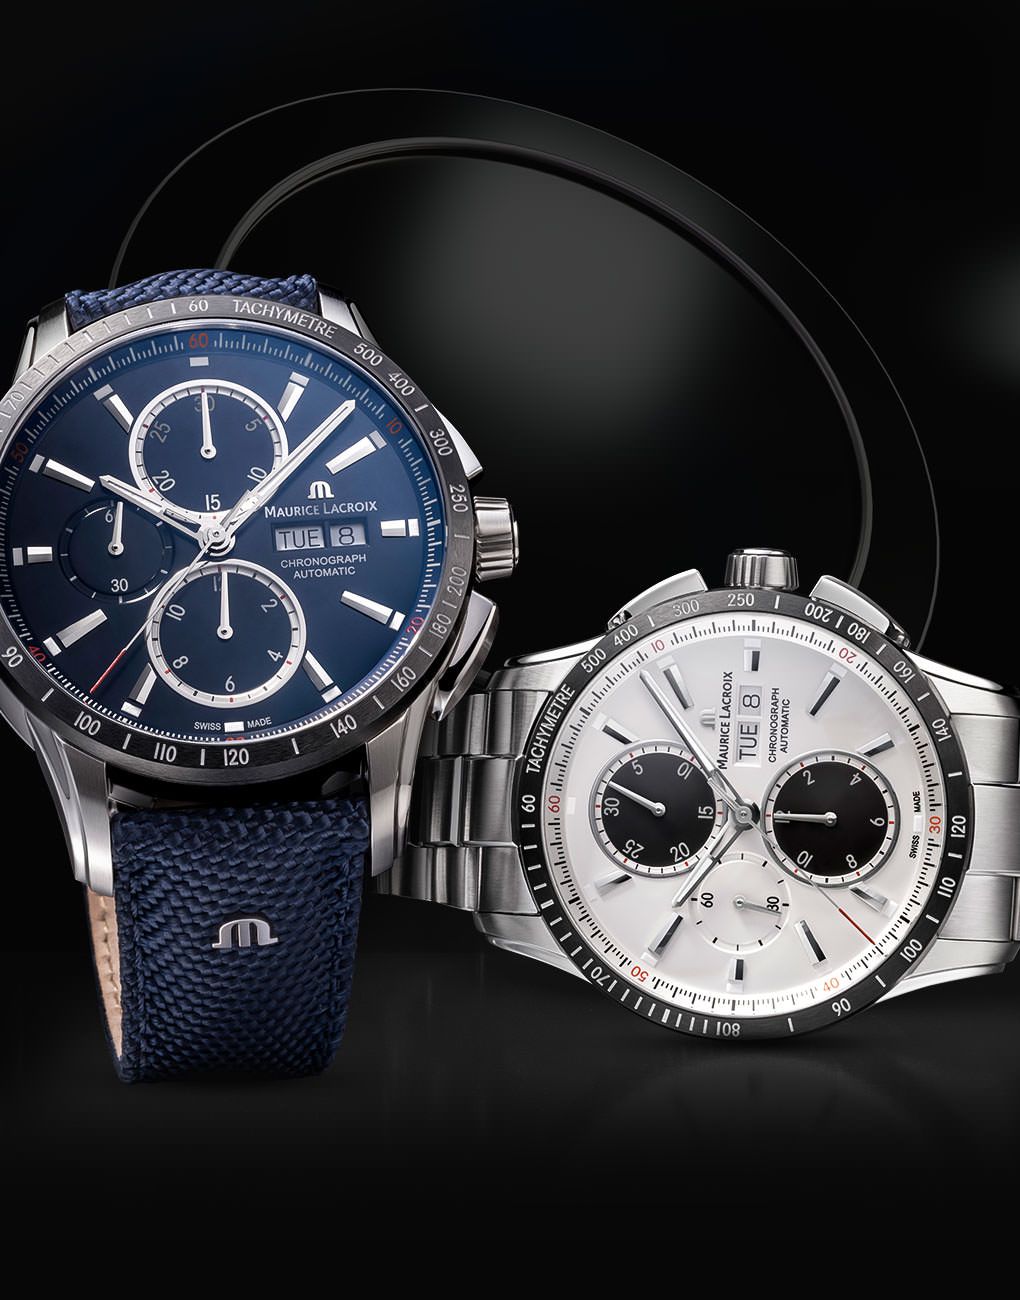 Maurice For Pontos Lacroix Chronograph Style: Review S S\' Sporty